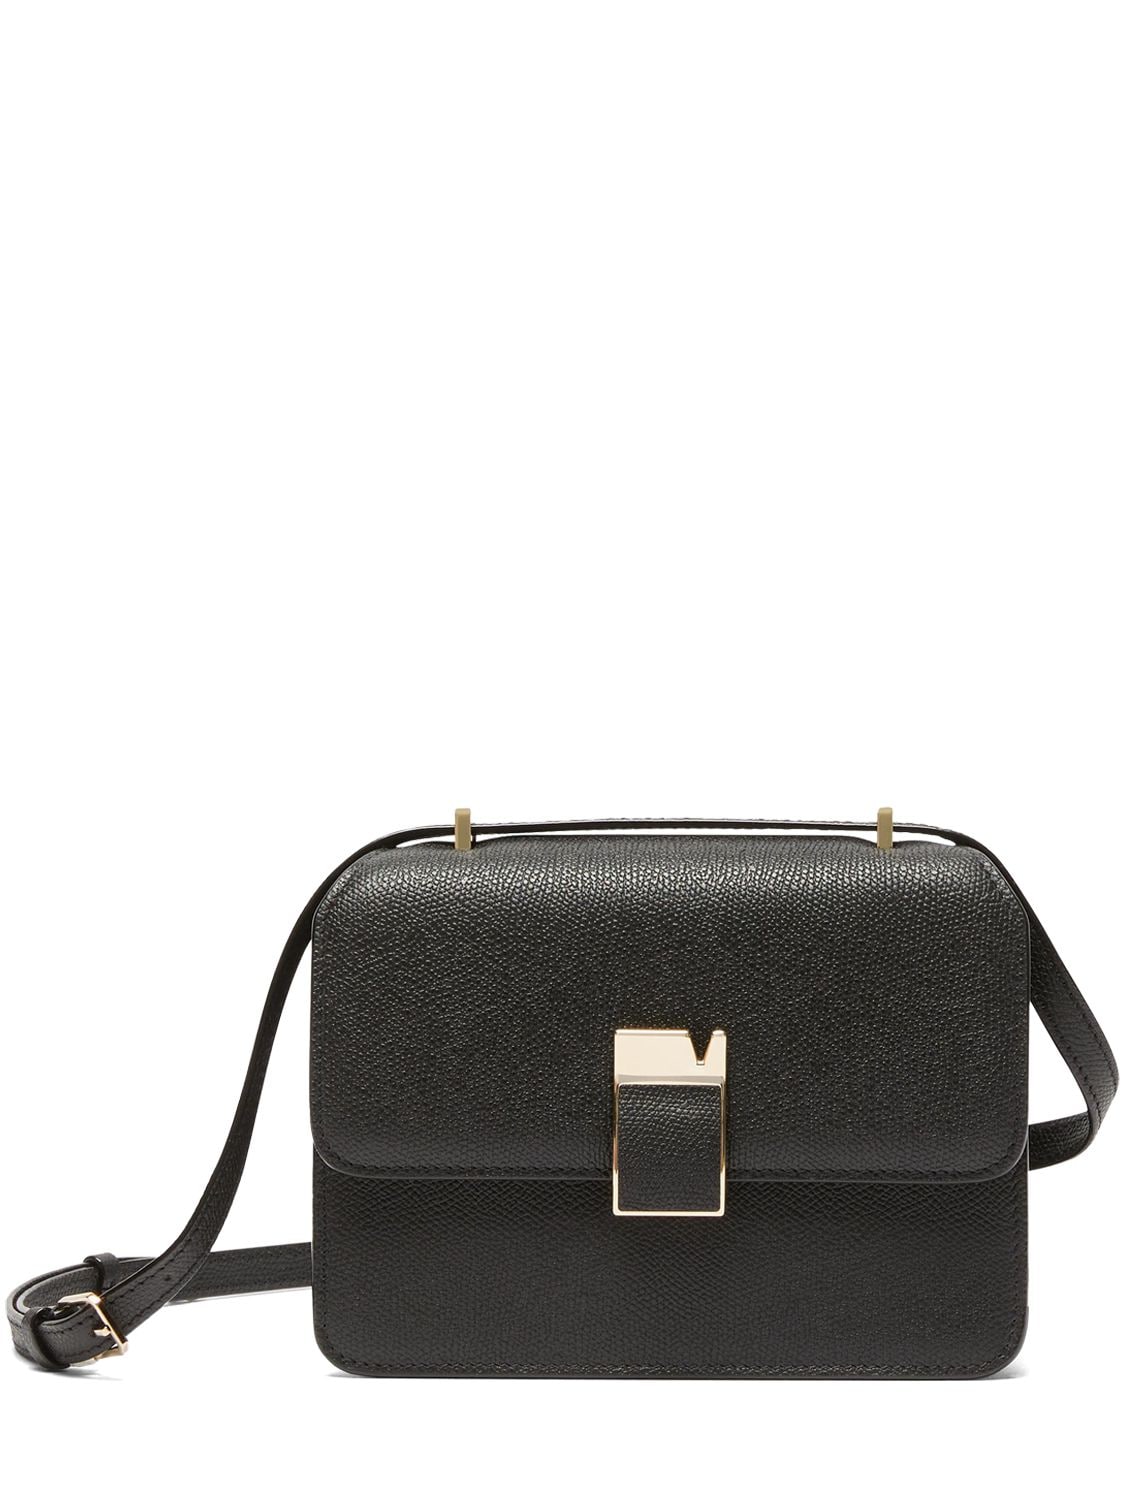 Image of Small Nolo Leather Shoulder Bag